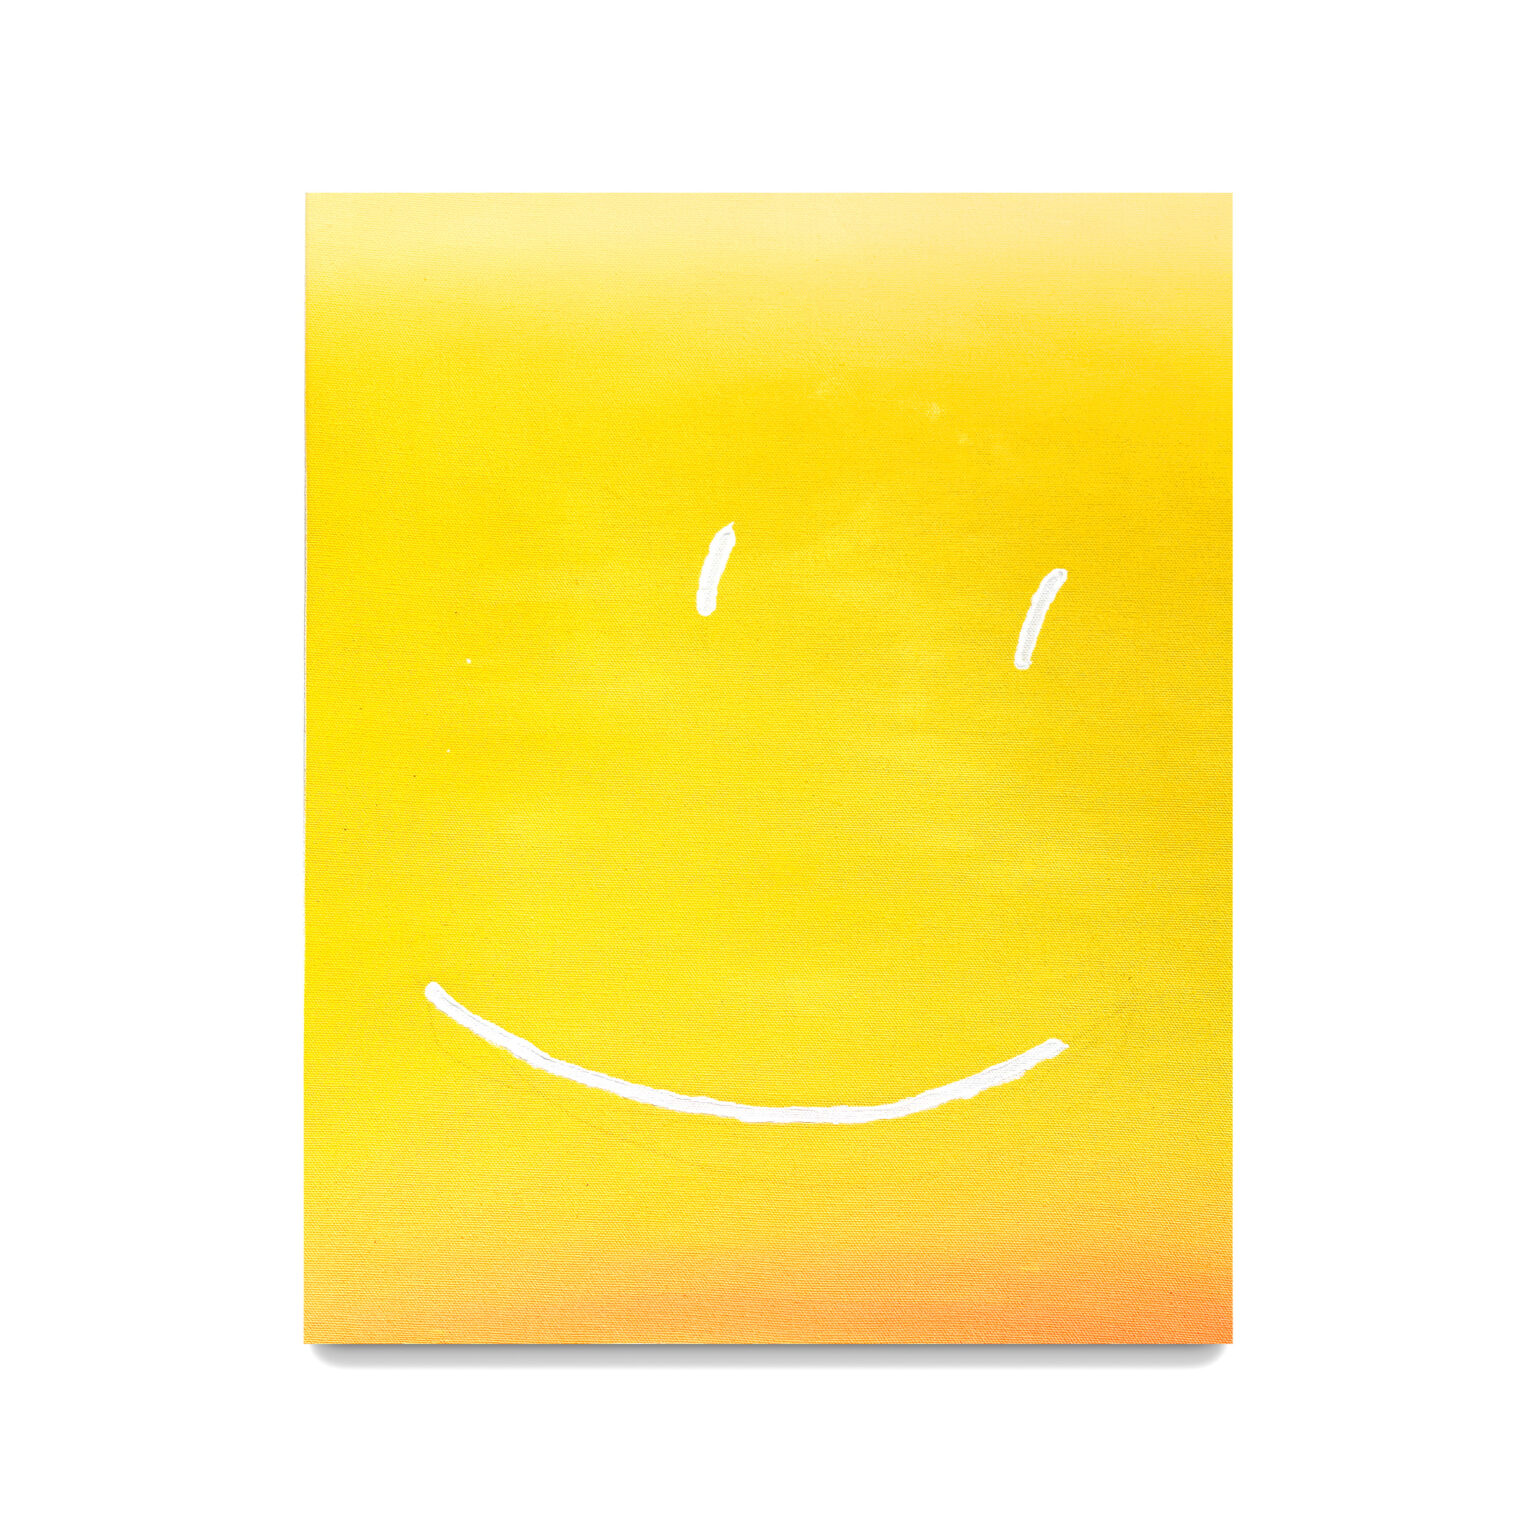 WESERHALLE-Andy-Kassier-yellow-square-smiley